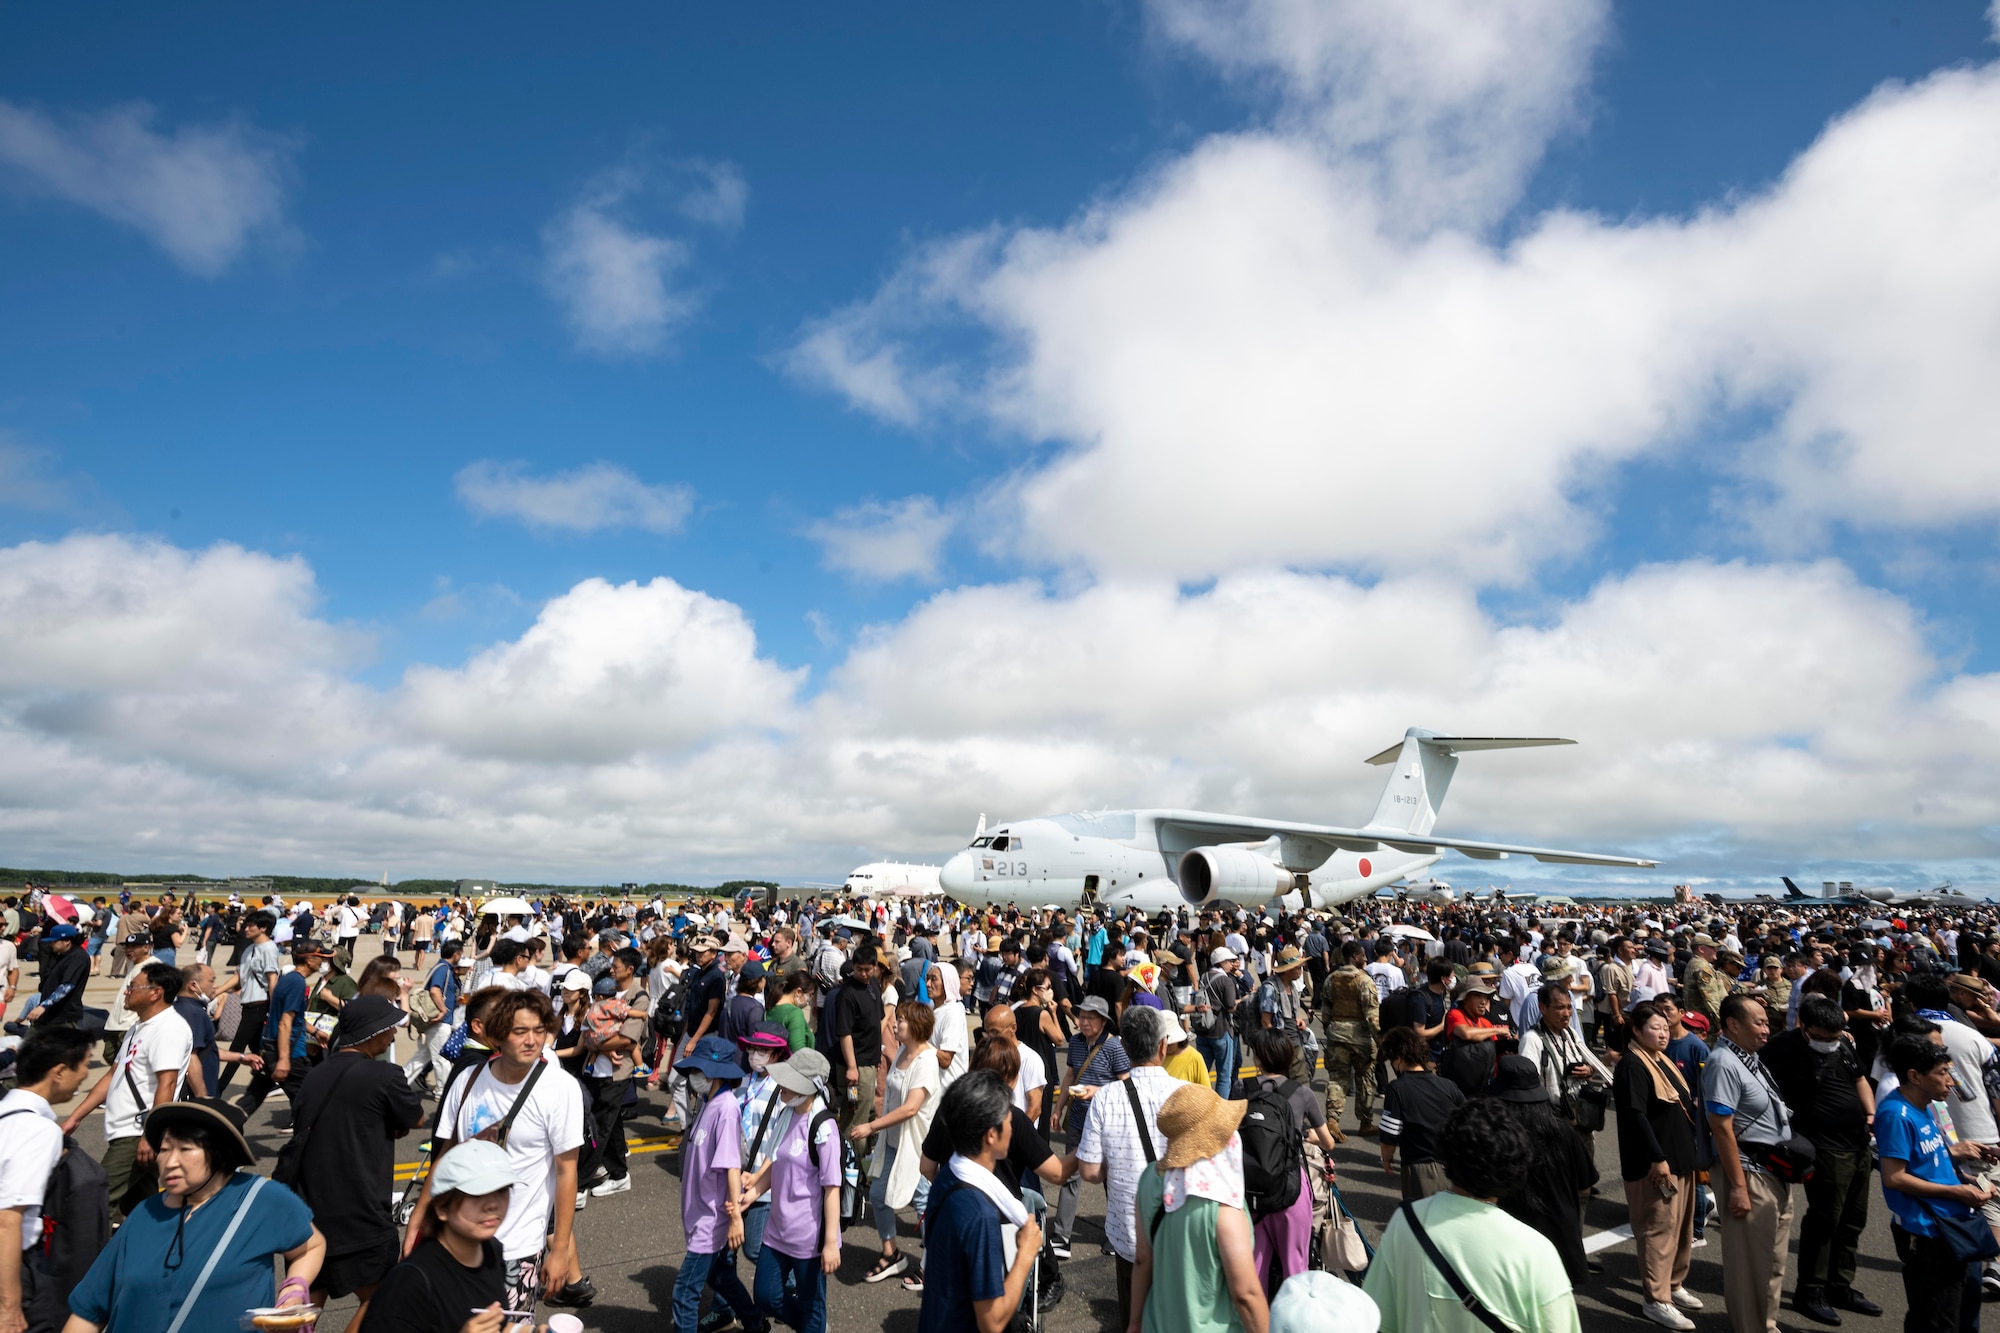 A photo of a plane parked on the runway surrounded by a lot of people.